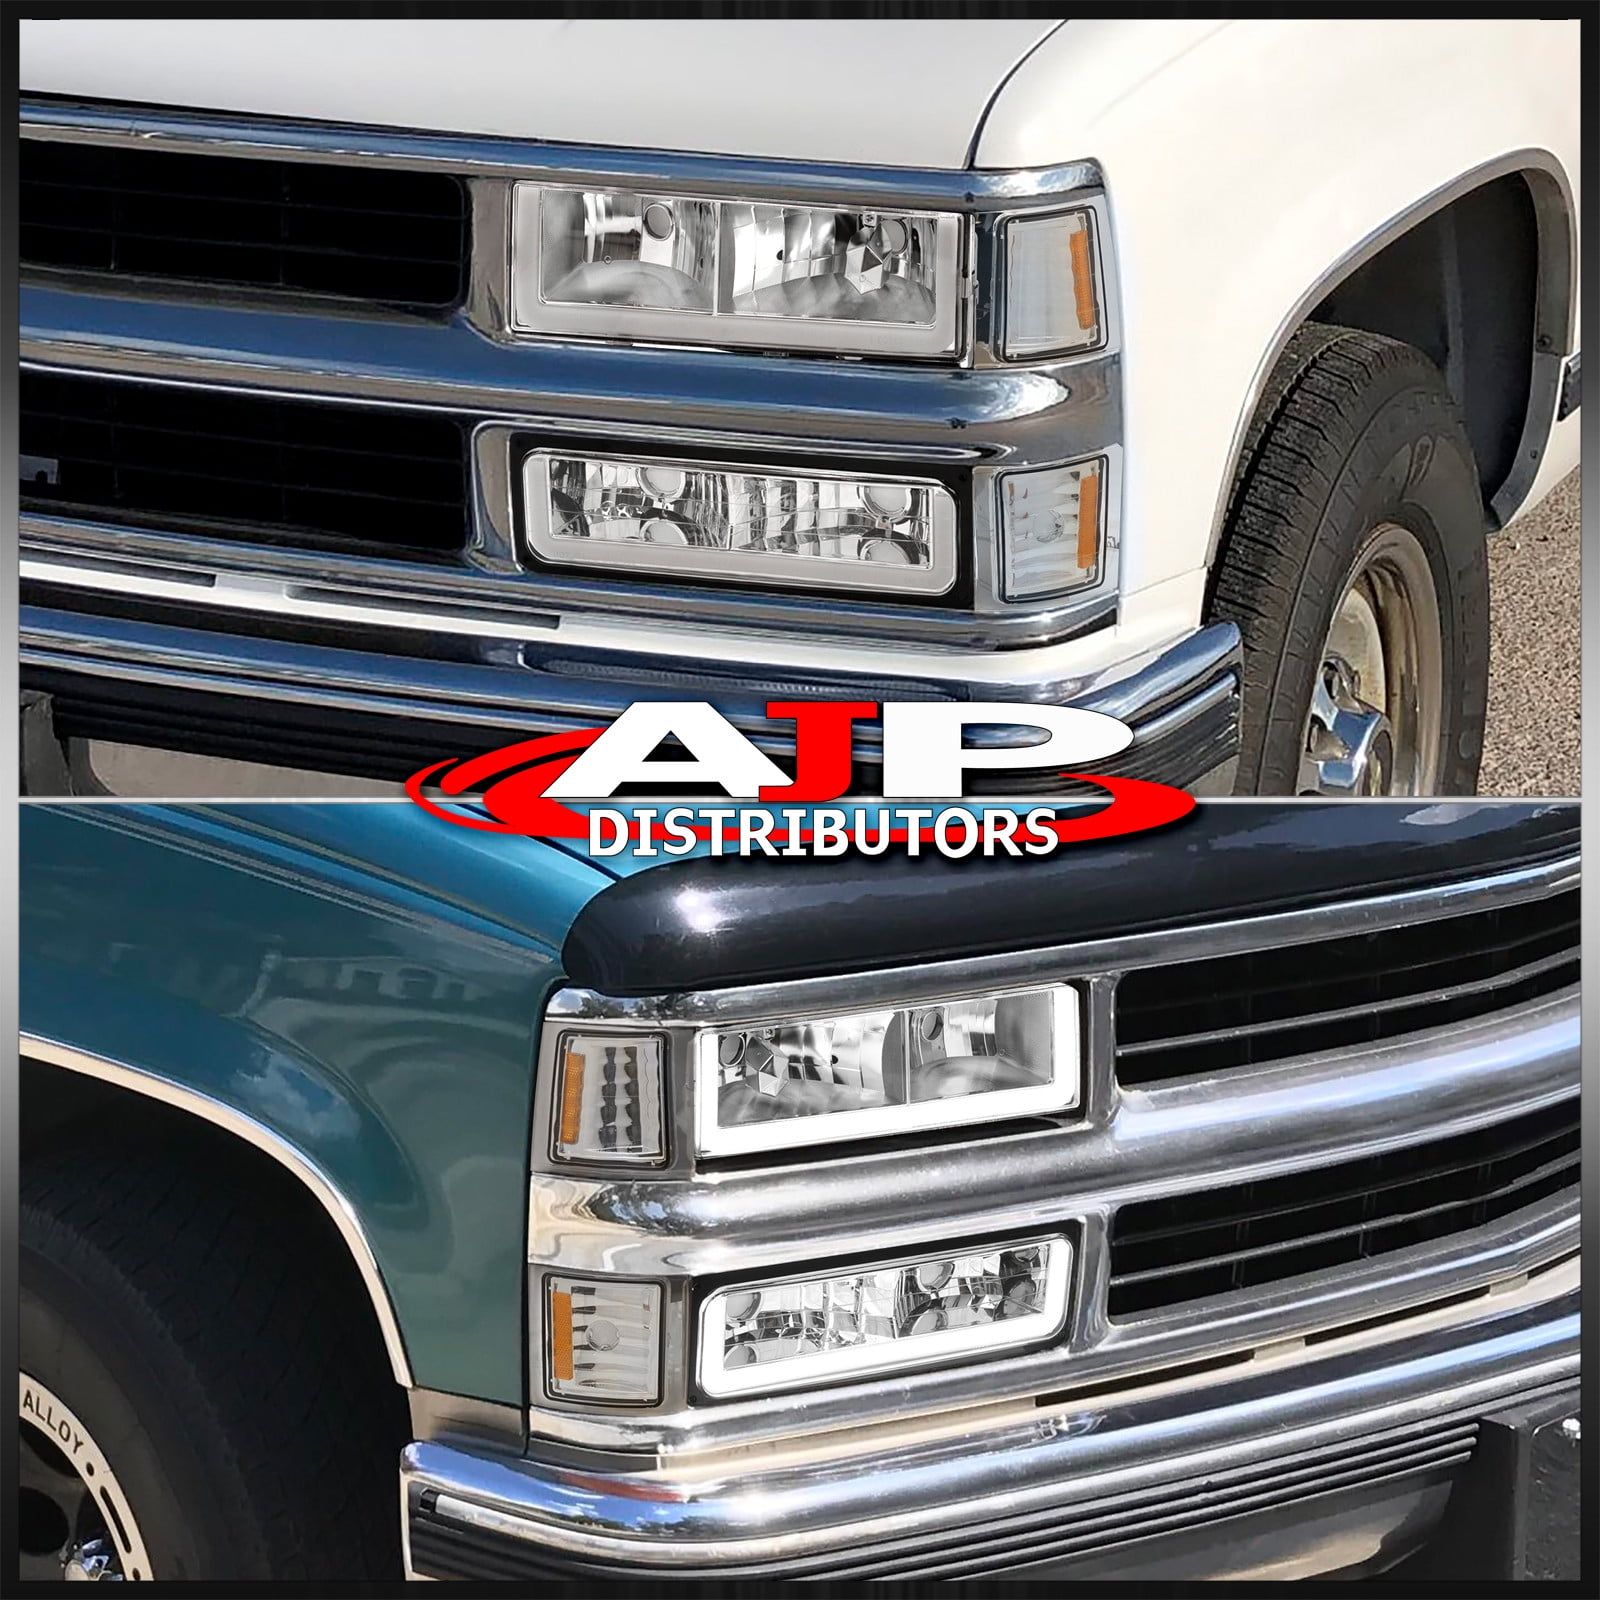 AJP Distributors Upgrade Replacement Chrome Amber Signal Smoked Corner Lights Lamps LH & RH Assembly Pair Set For Chevrolet Chevy C10 C/K Suburban Tahoe Blazer 1994 1995 1996 1997 1998 94 95 96 97 98 